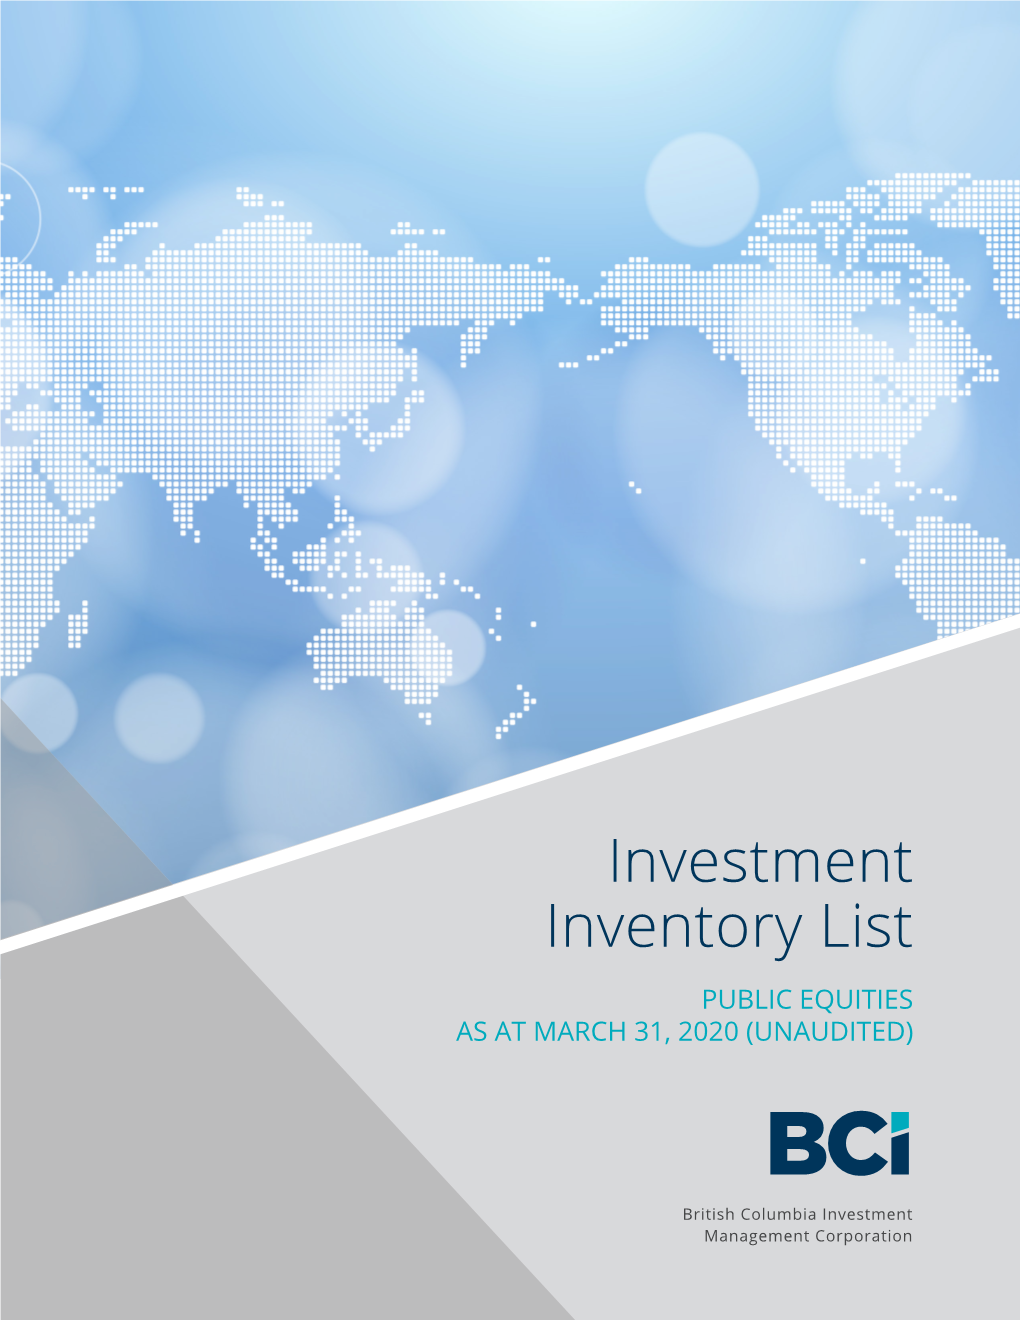 Public Equities Investment Inventory